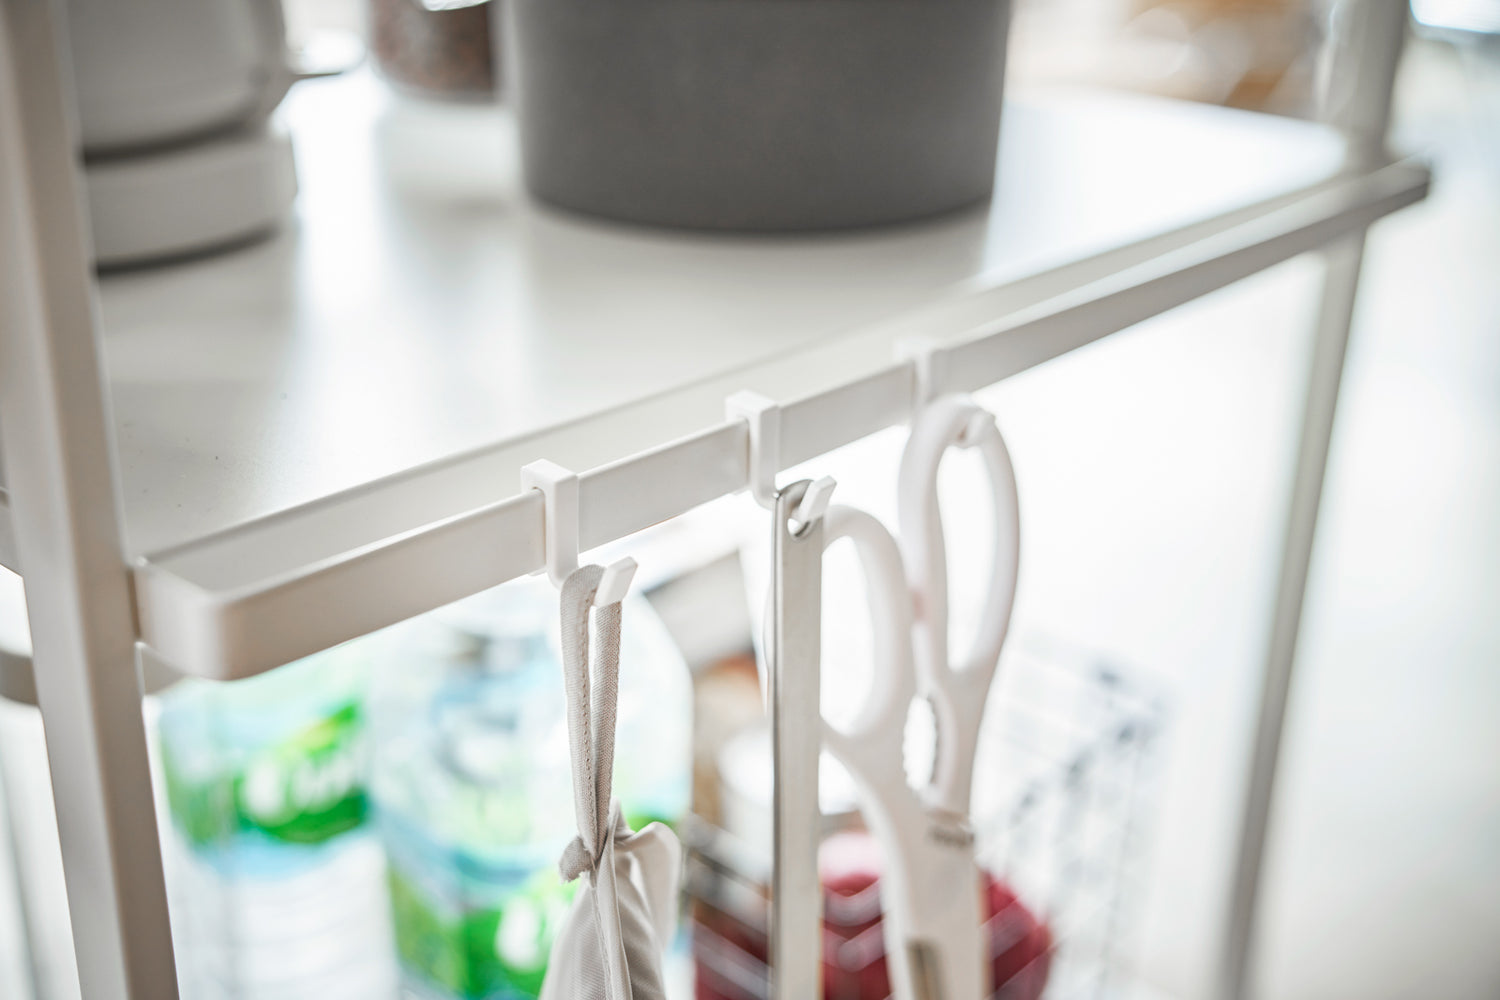 View 6 - Close up of white Rolling Utility Cart hooks holding kitchen utensils by Yamazaki Home.